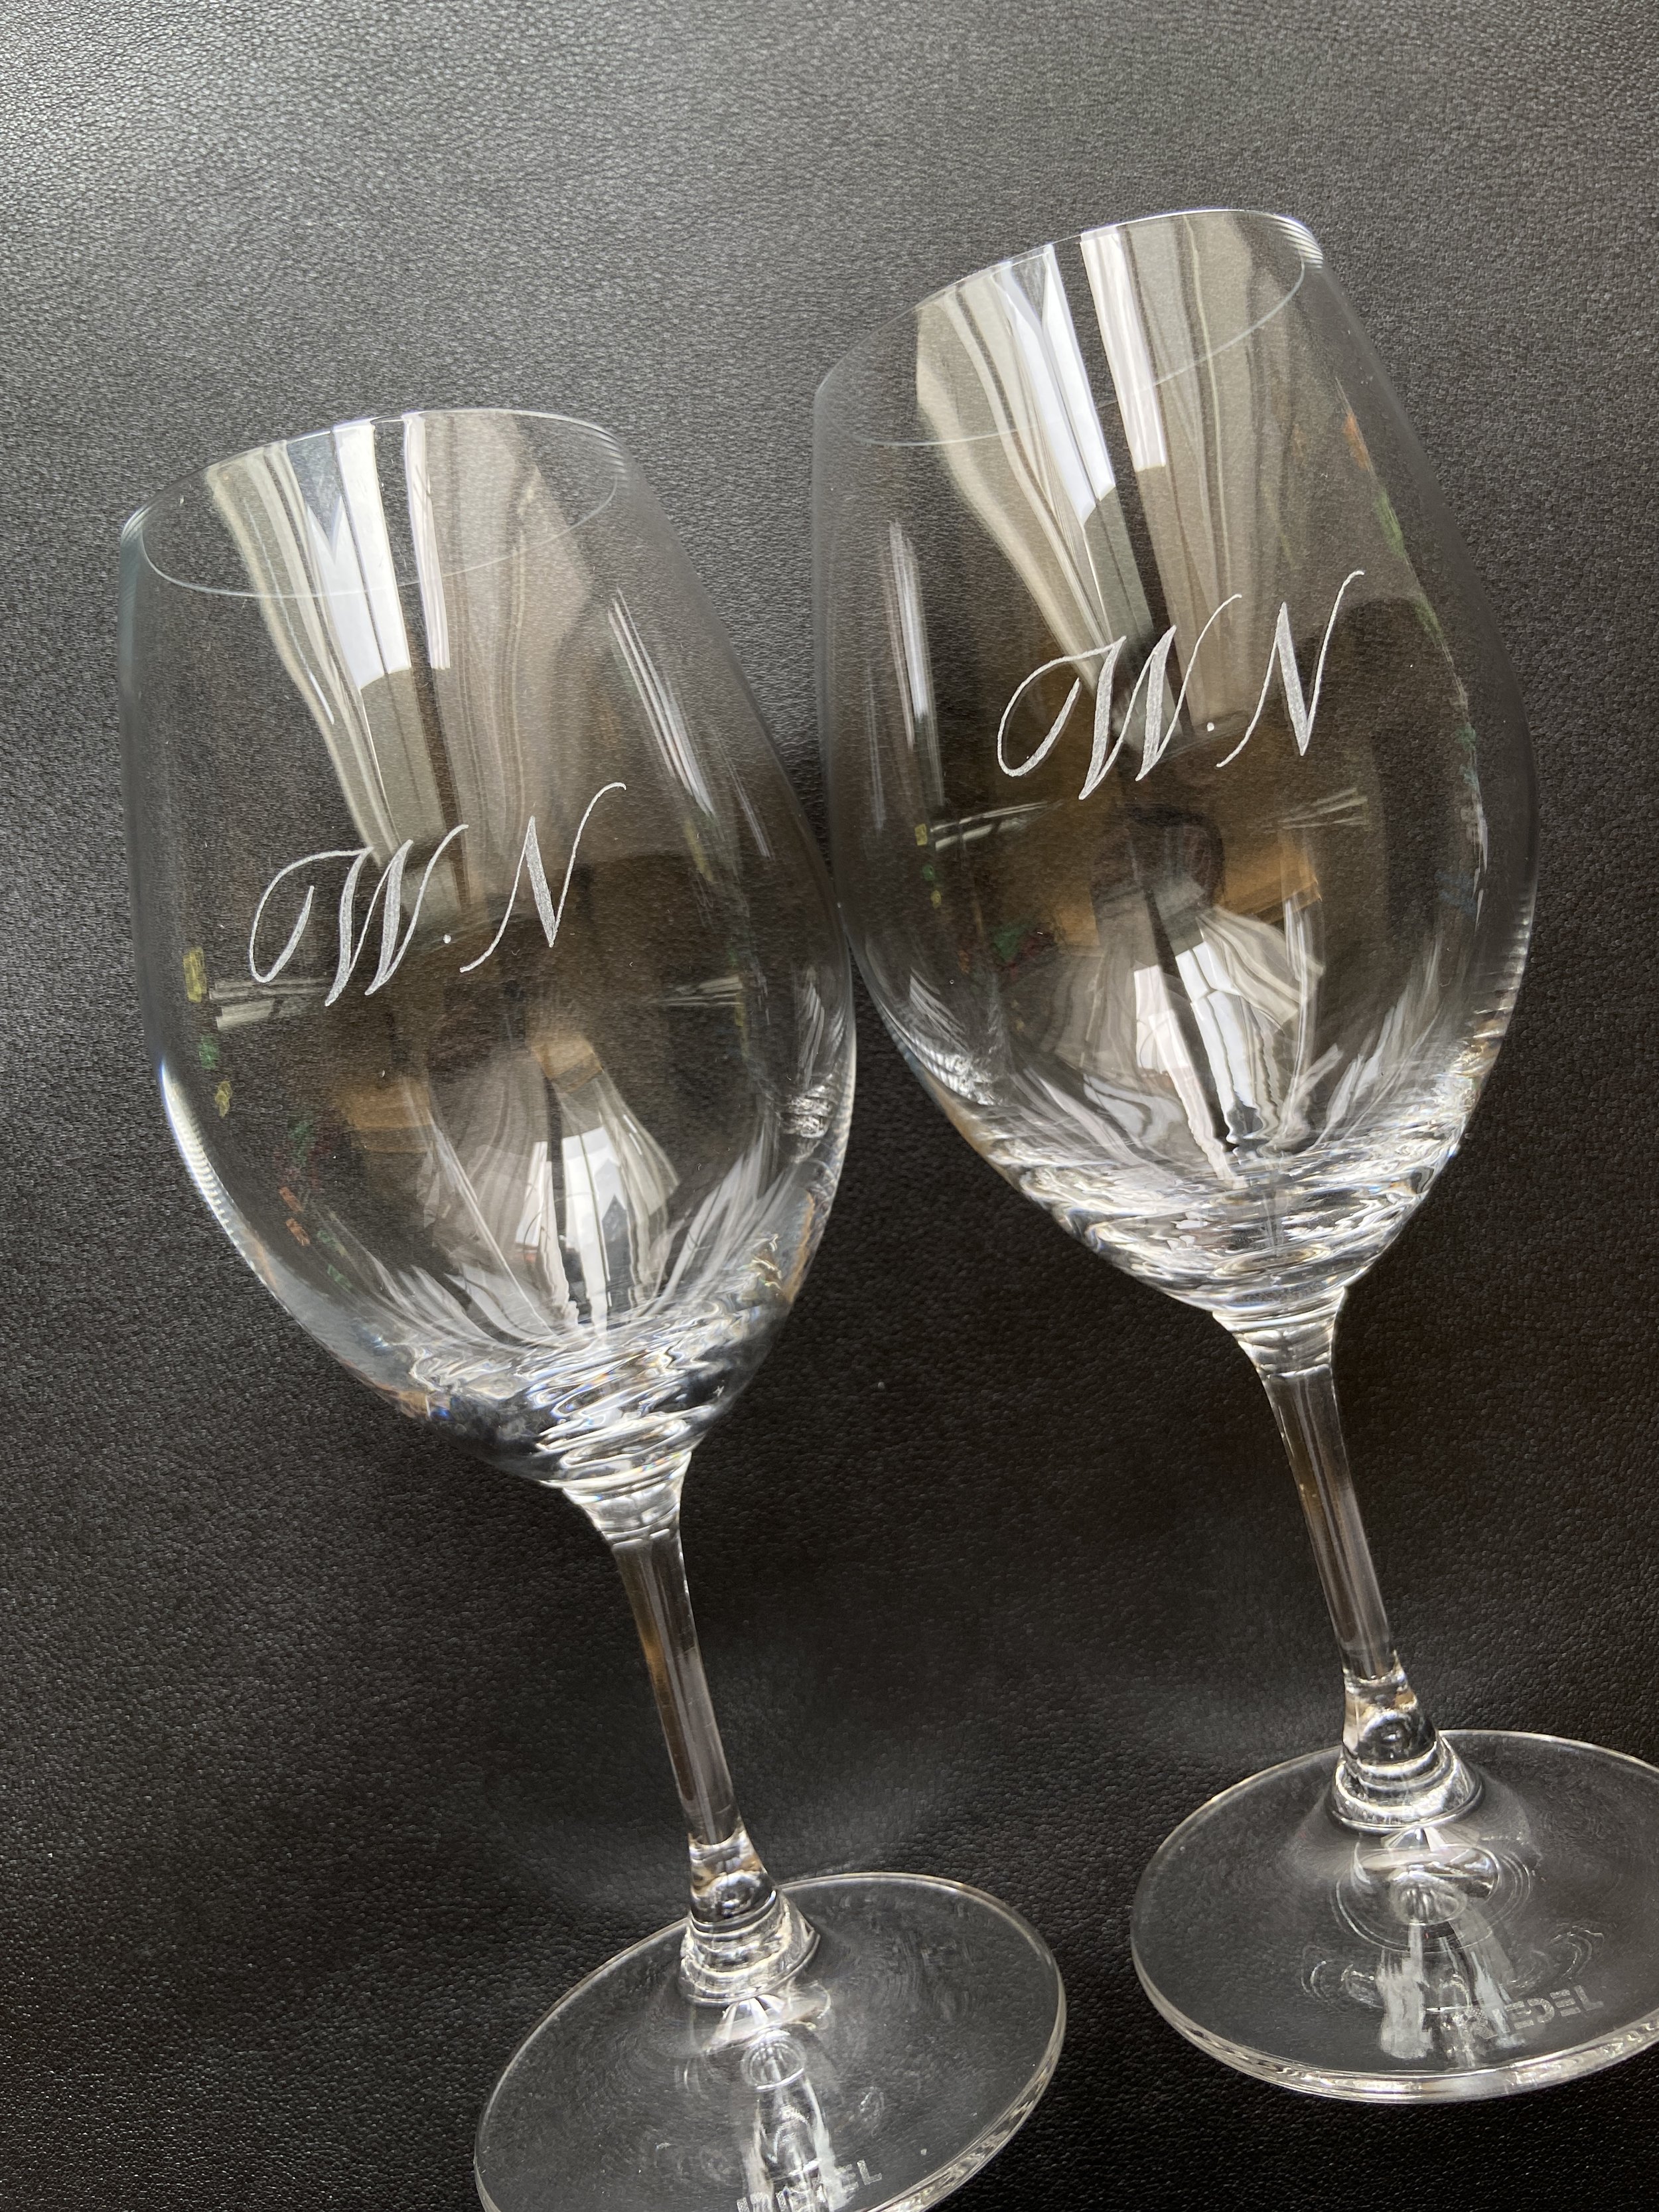 W.N. Initials on Riedel Red Wine Glasses